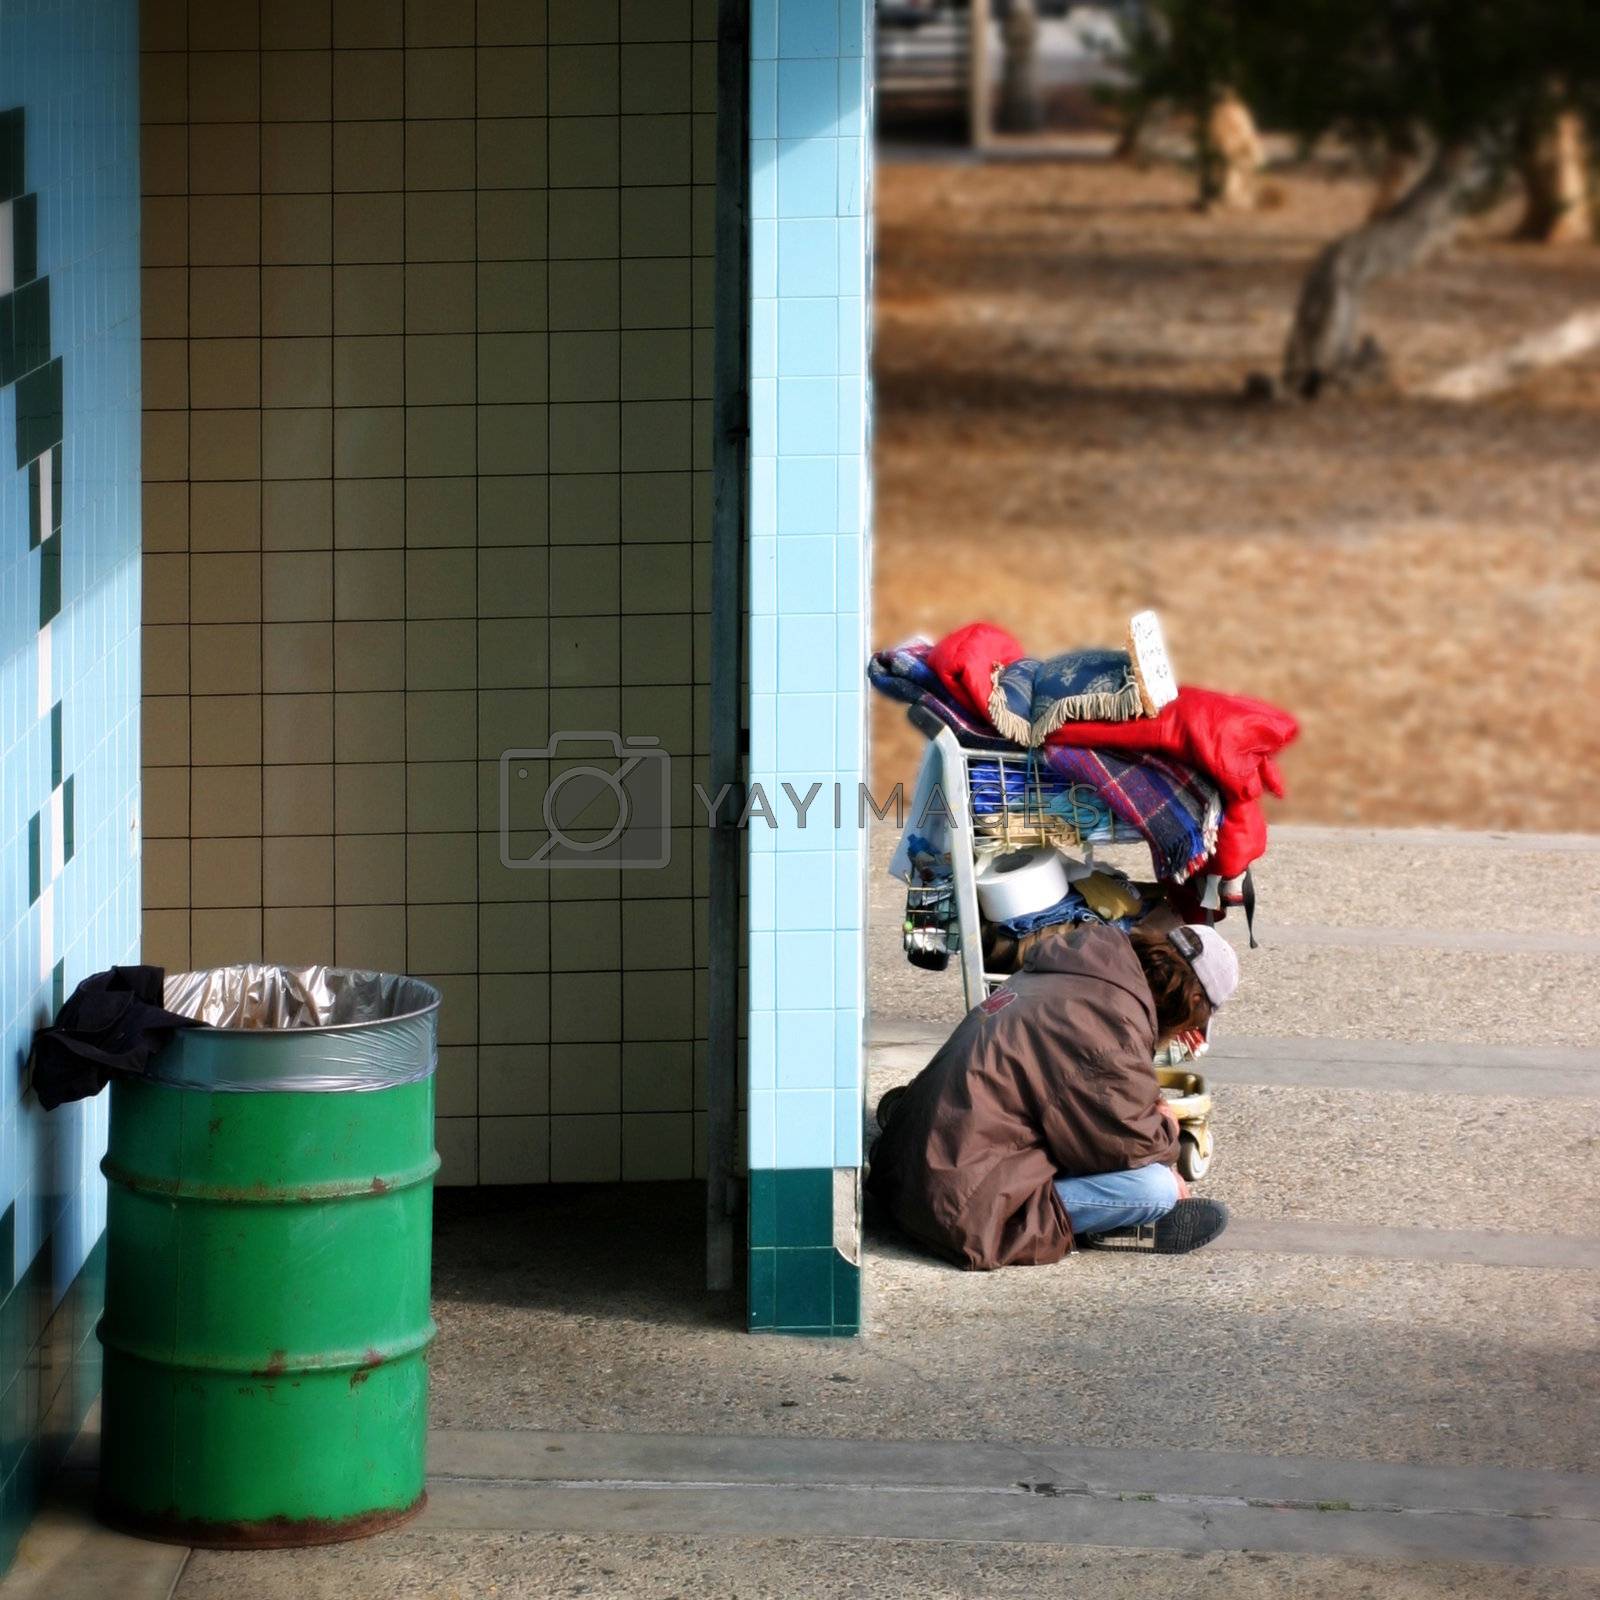 Royalty free image of Homeless (4435) by hlehnerer